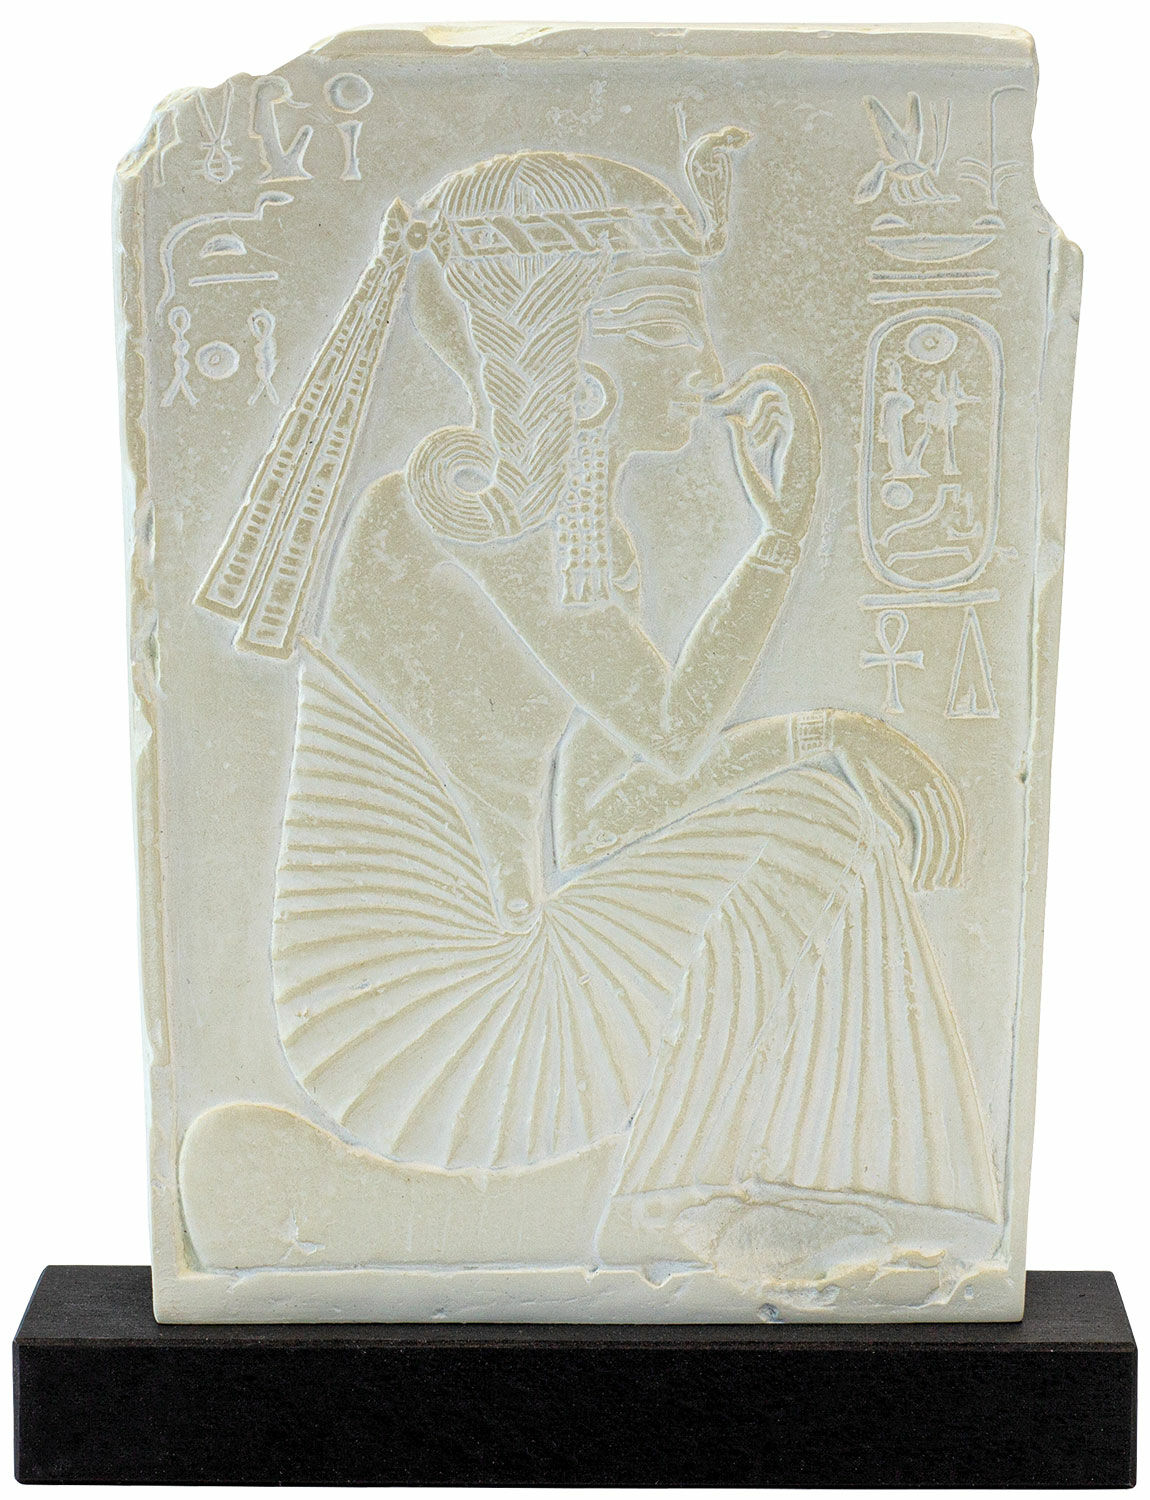 Relief sculpture "Ramesses II as a King's Child", cast